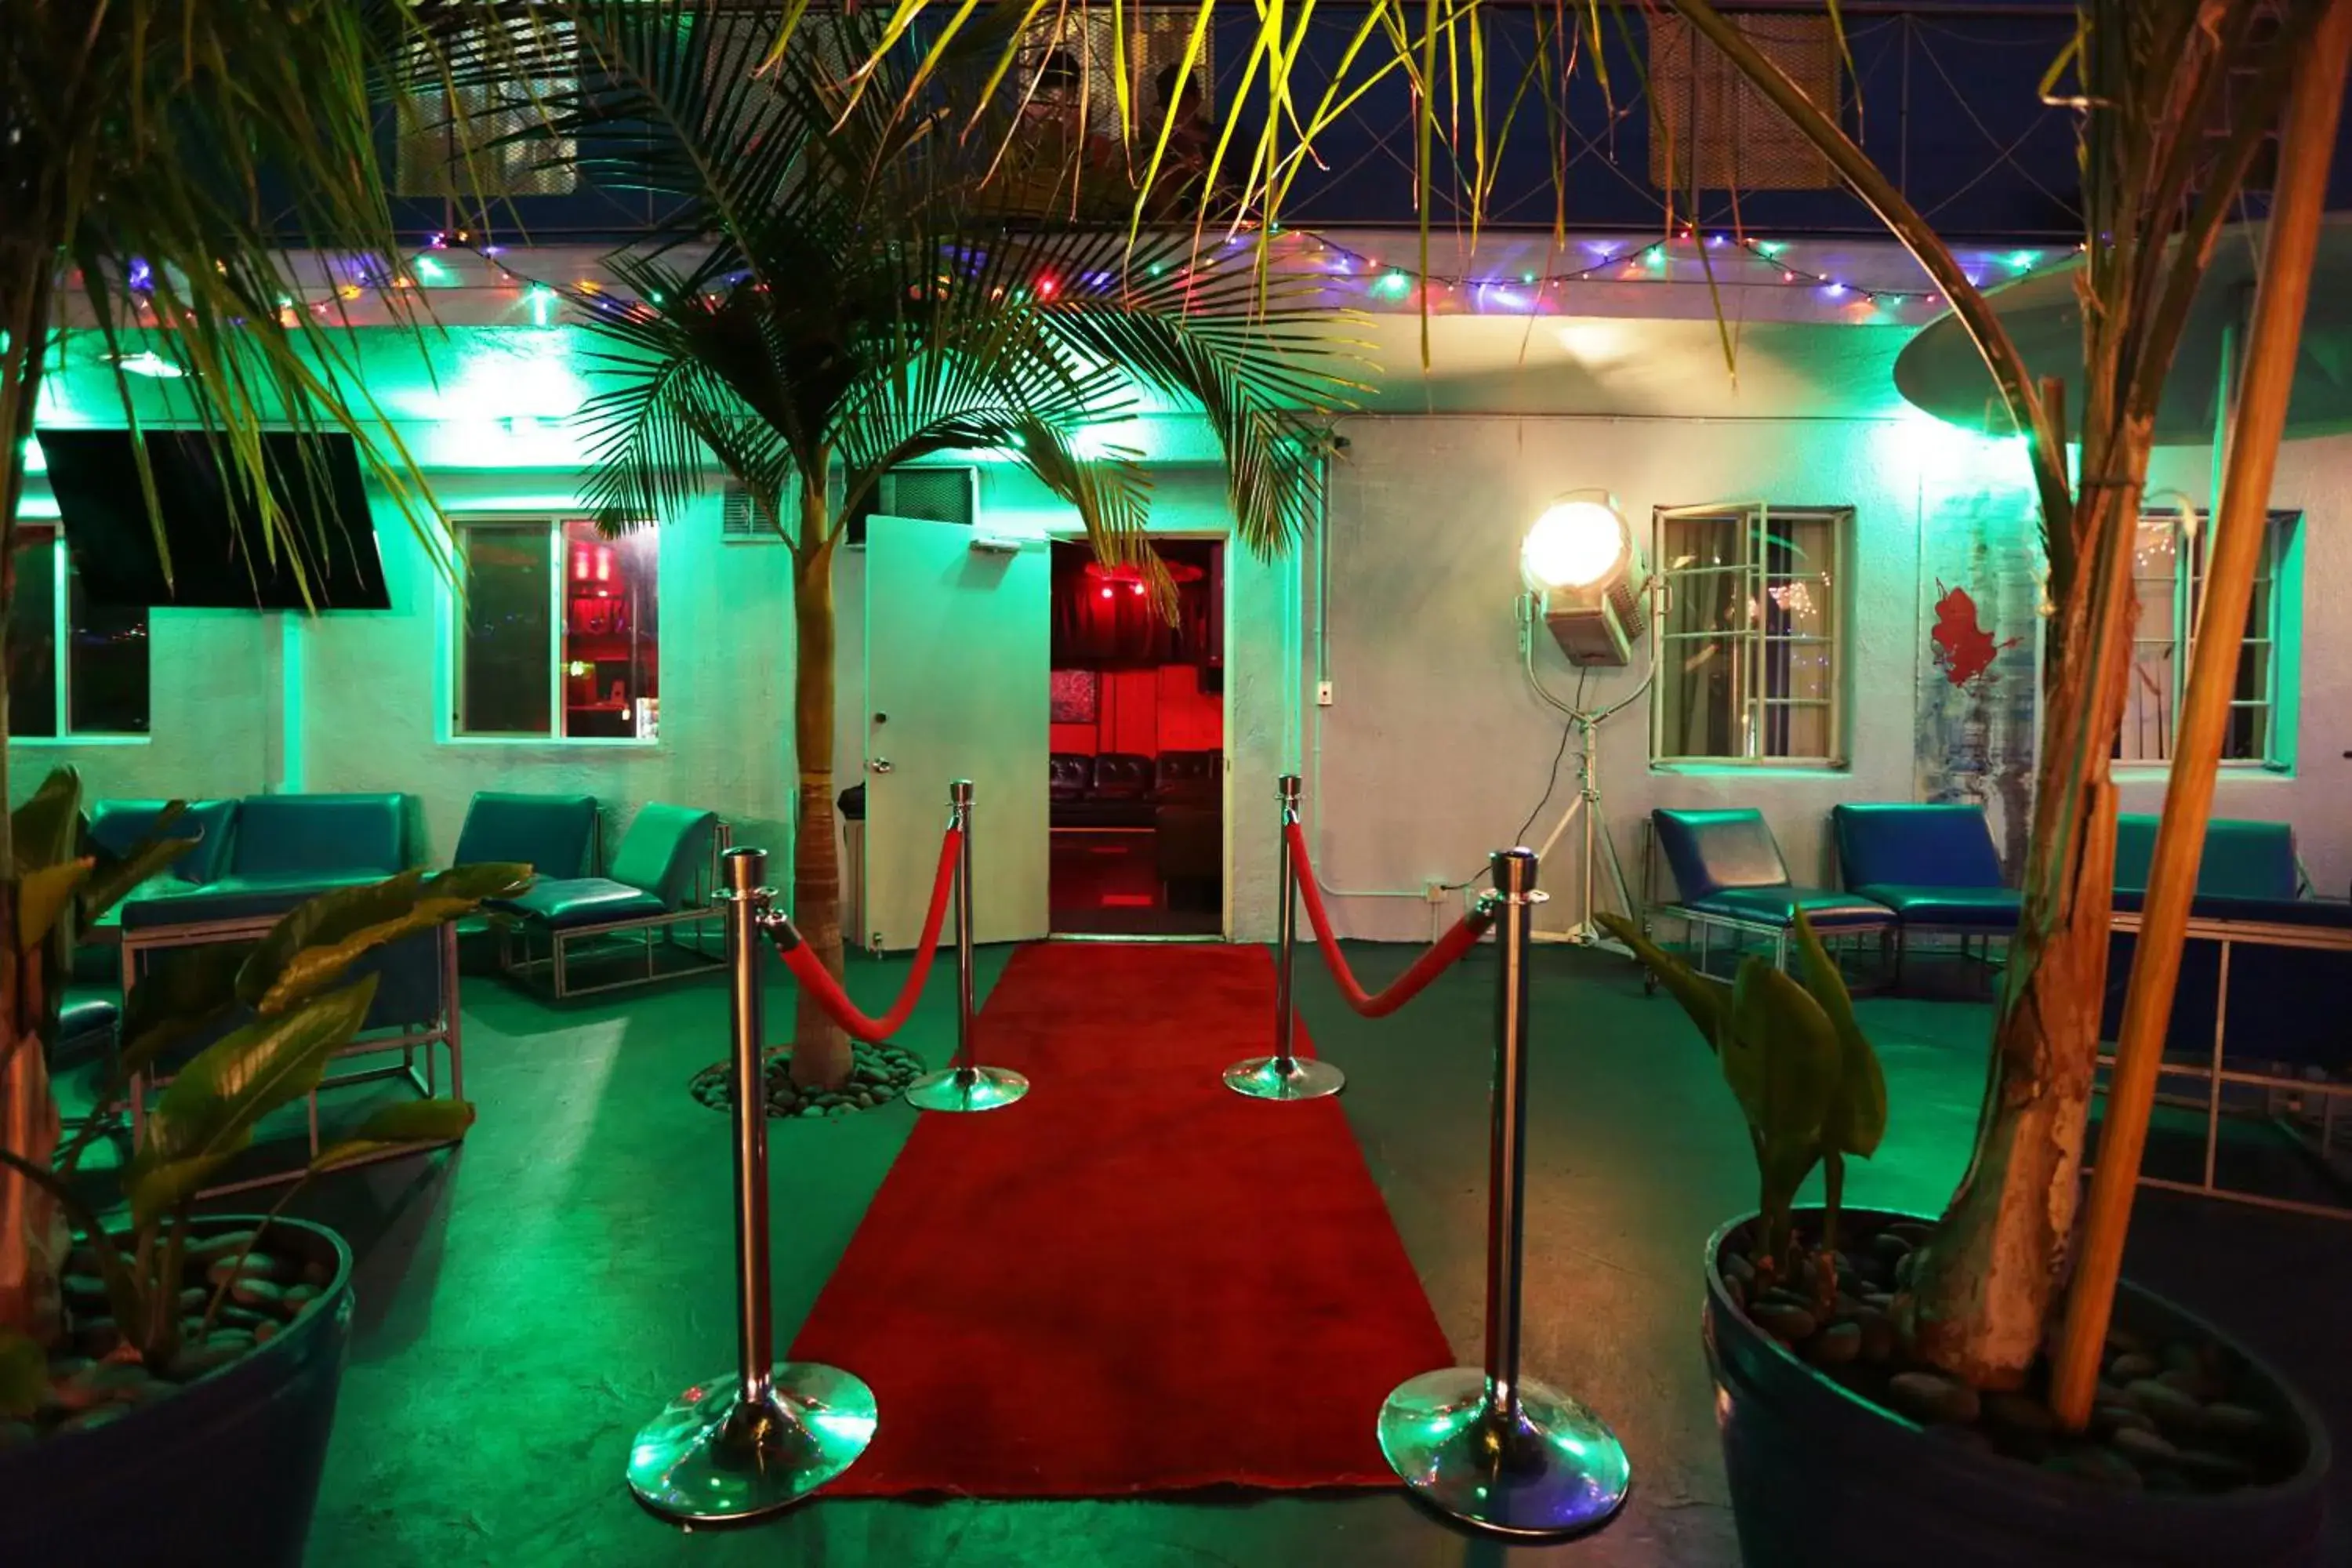 Night, Fitness Center/Facilities in Banana Bungalow Hollywood Hotel & Hostel